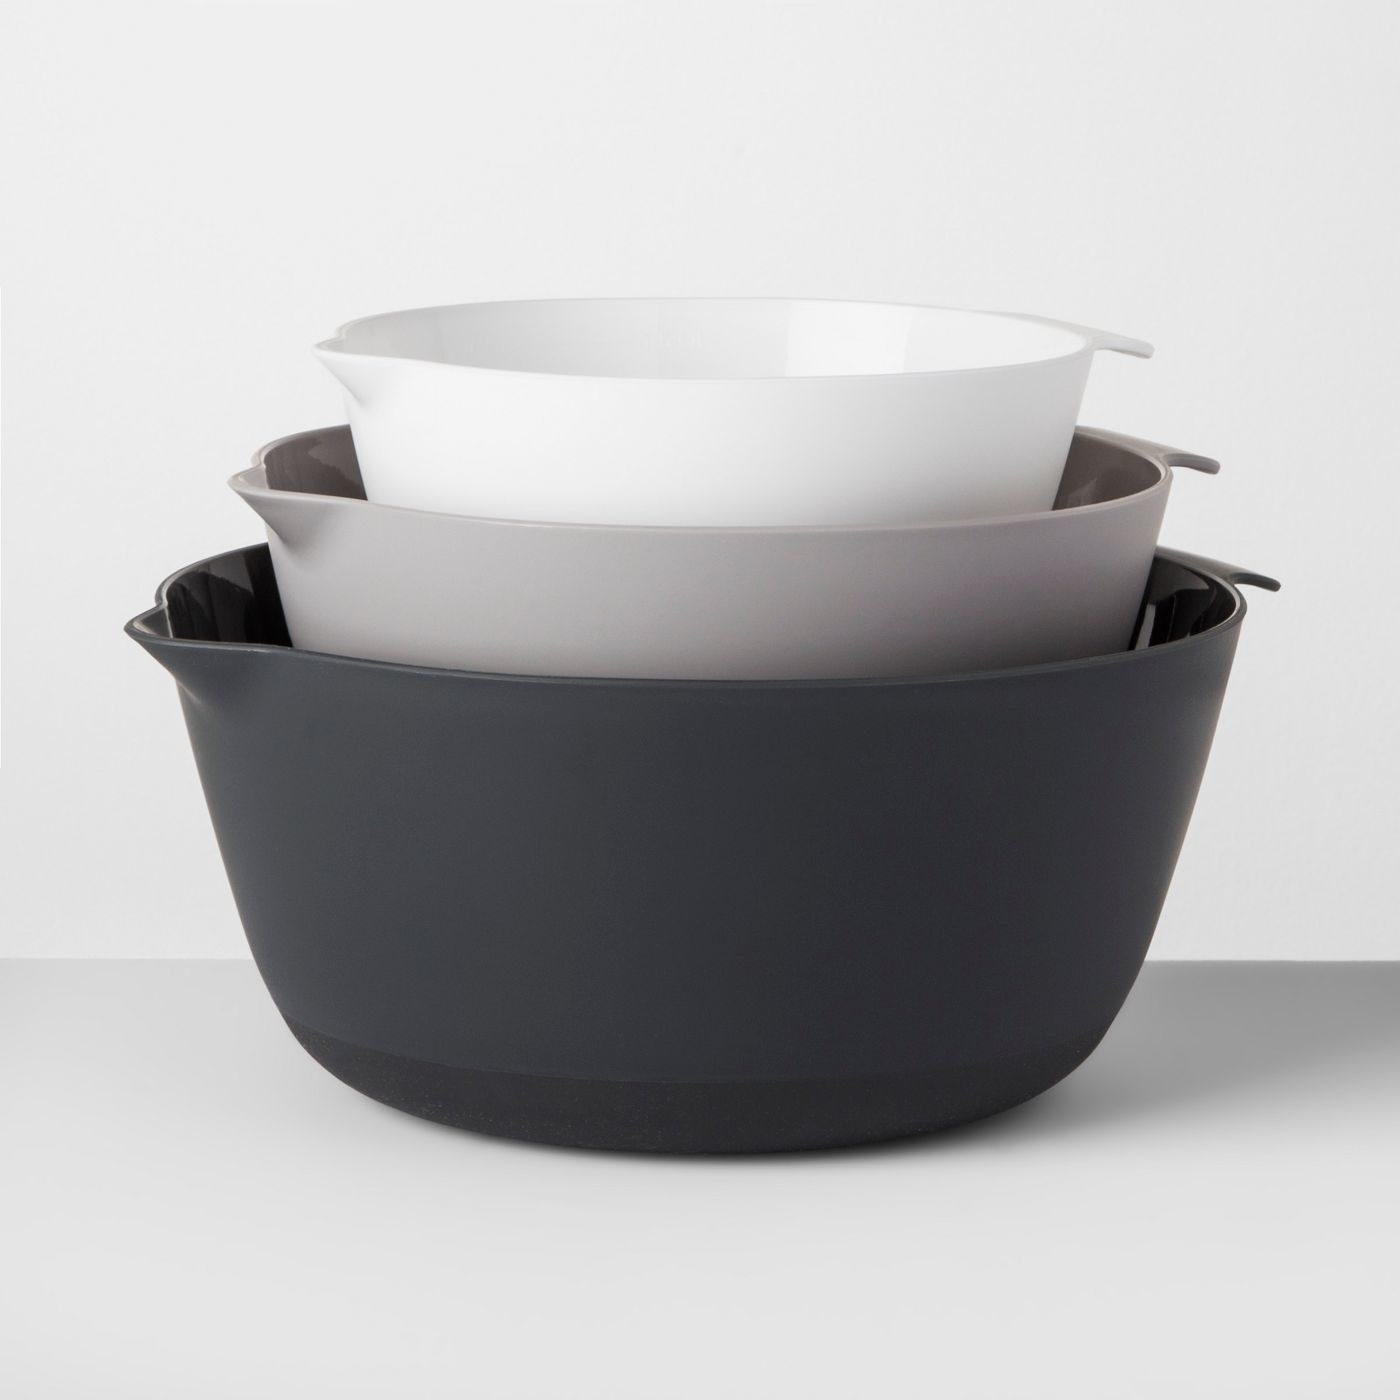 three different sized mixing bowls  in white, light grey, and dark grey